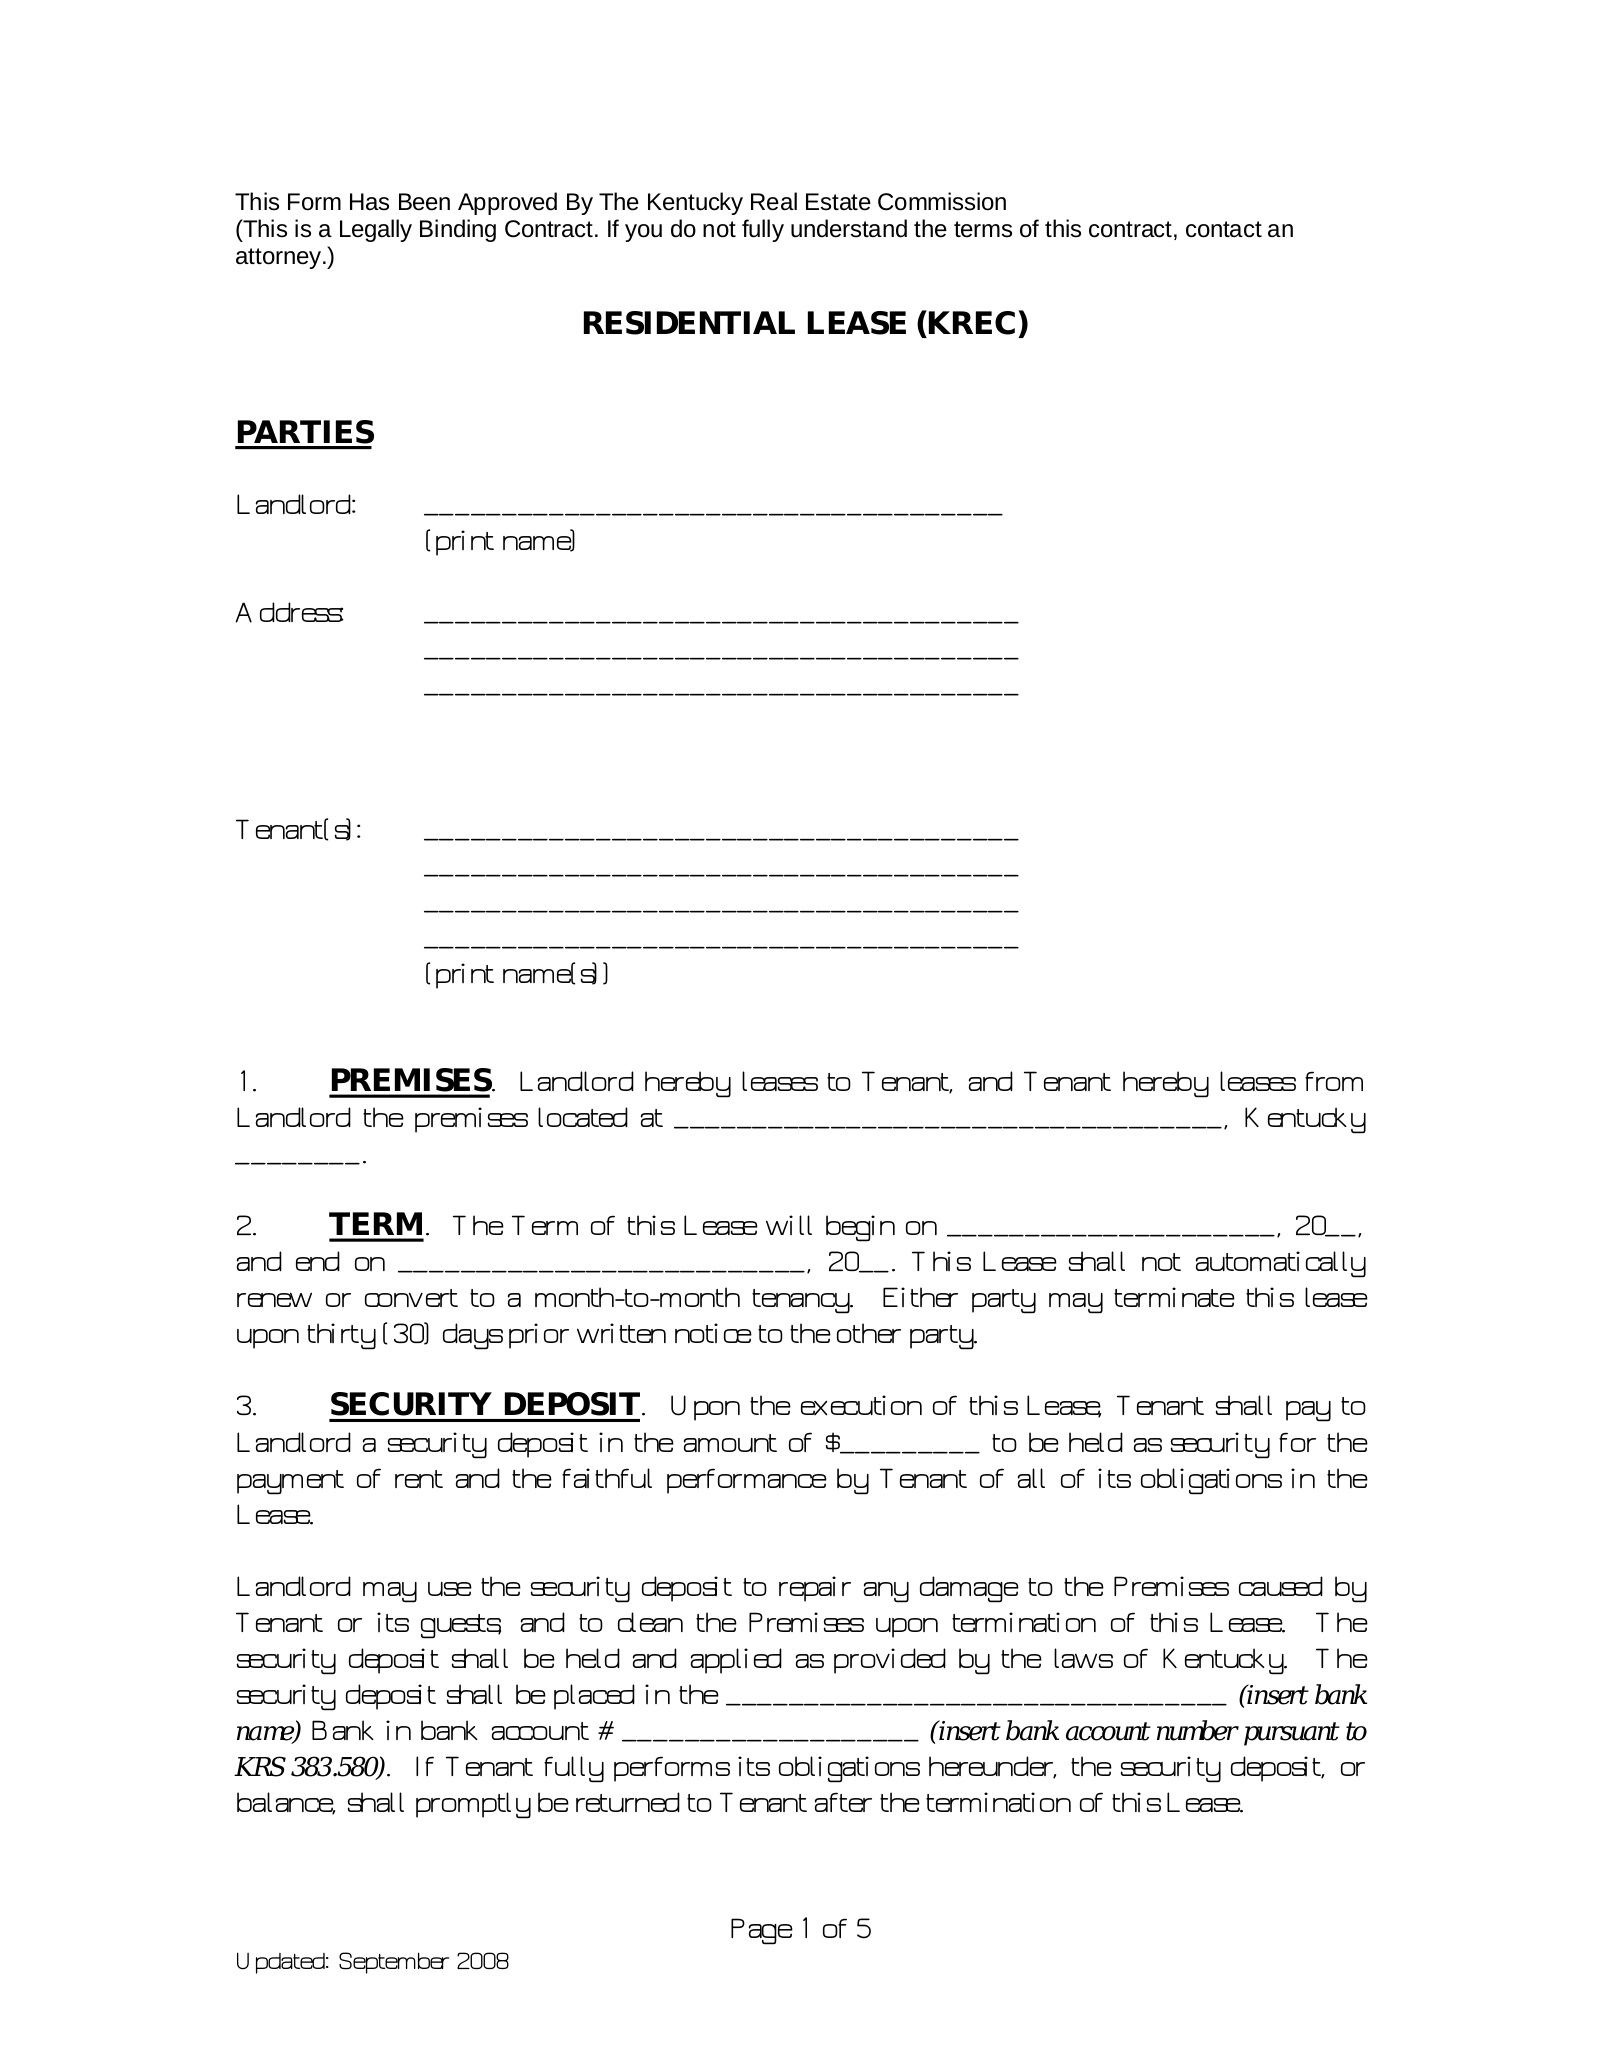 Kentucky Real Estate Commission (KREC) Lease Agreement